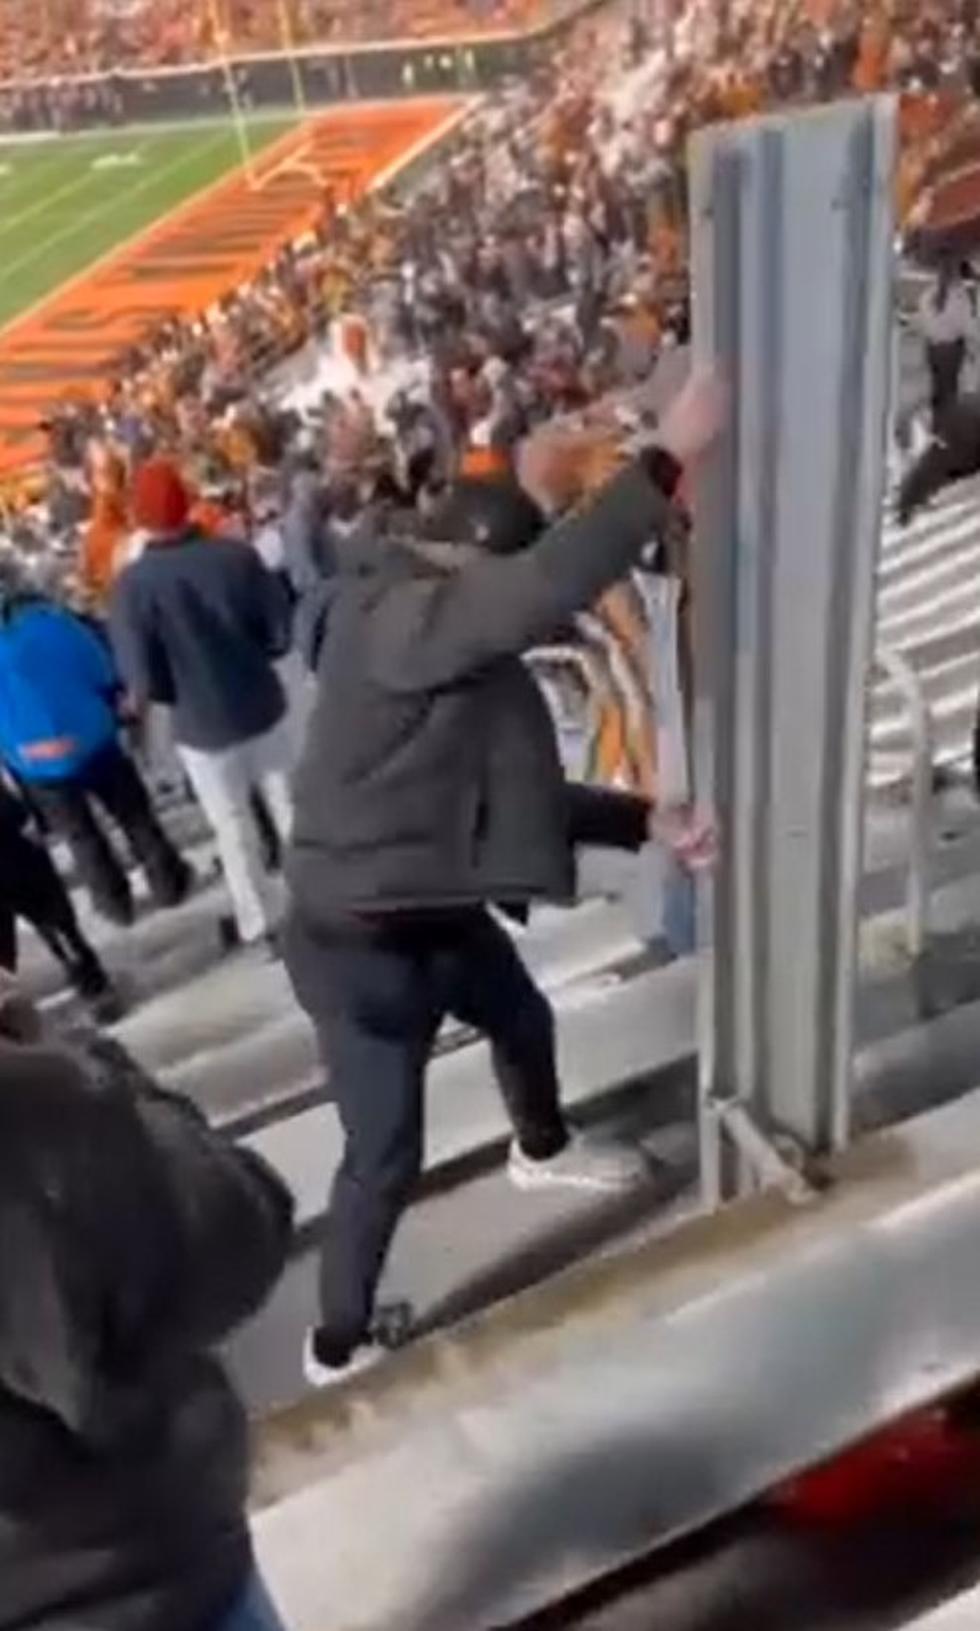 Oklahoma State Student Rips Bleacher Seat Out of Stands [VIDEO]